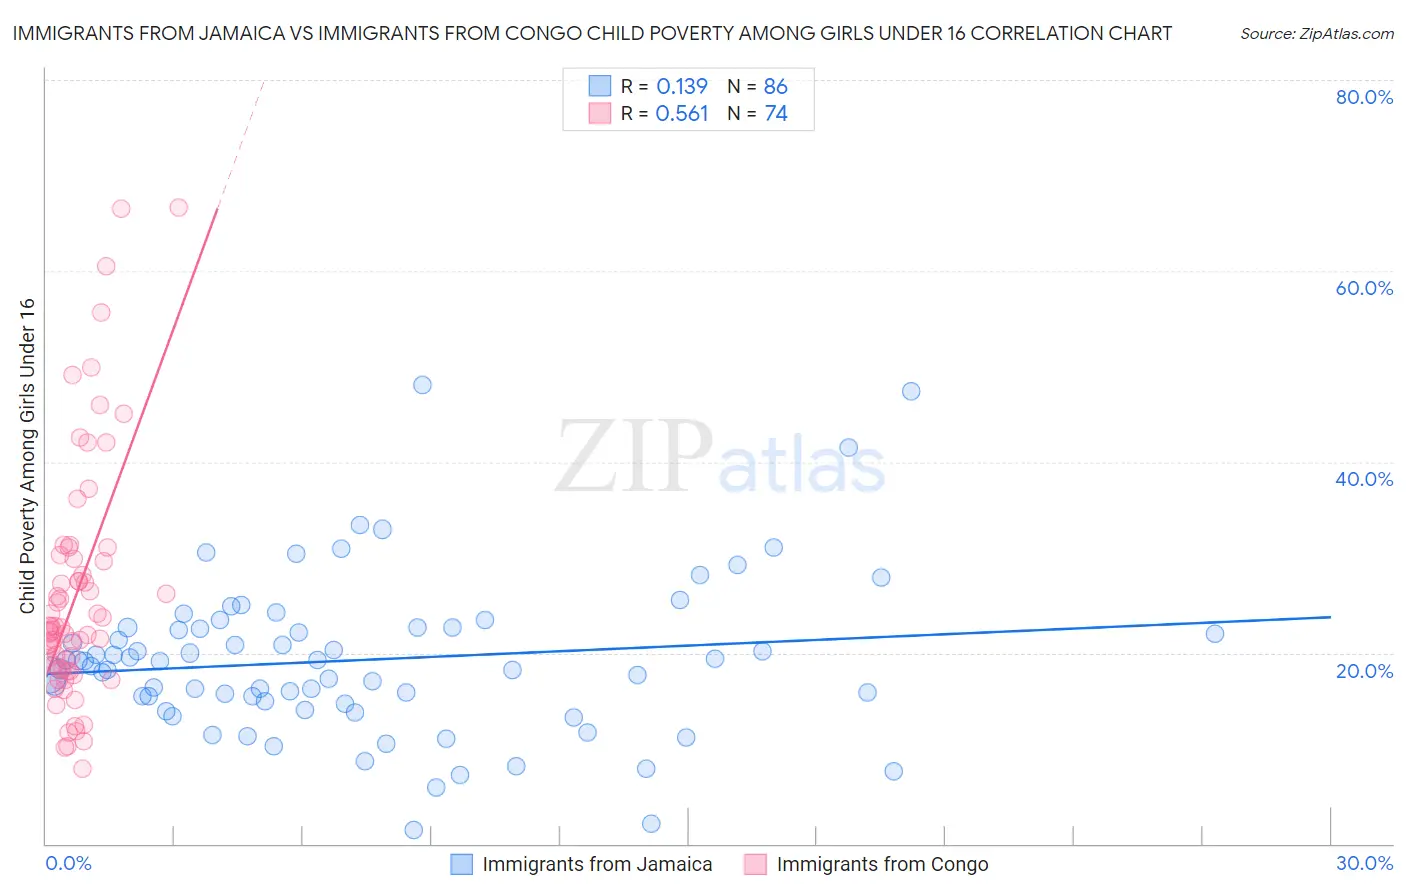 Immigrants from Jamaica vs Immigrants from Congo Child Poverty Among Girls Under 16